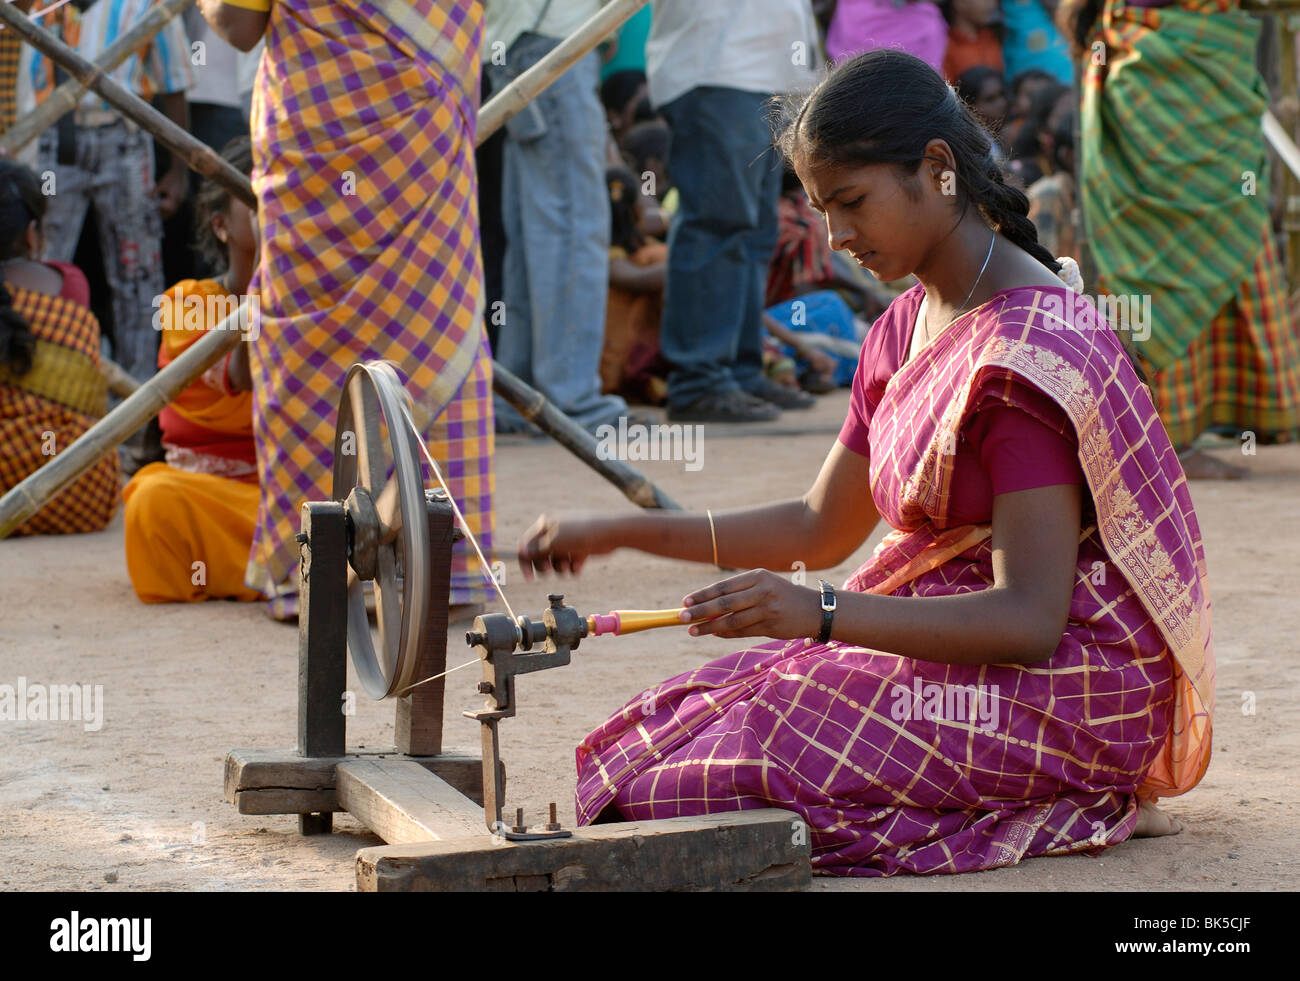 Young woman spinning yarn on a spinning wheel, Tamil Nadu, India